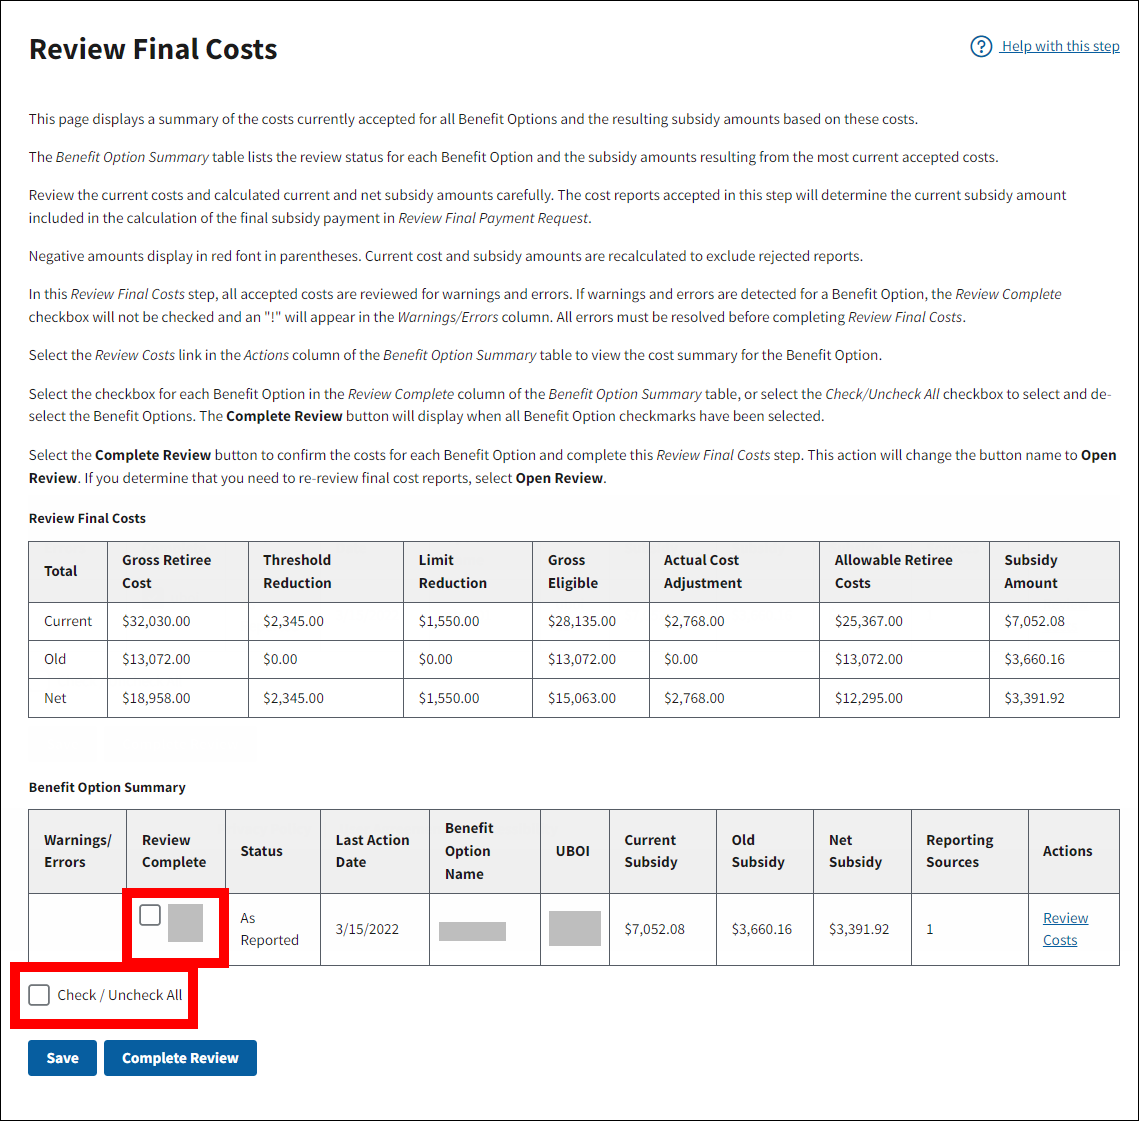 Review Final Costs page with sample data. Review Complete and Check/Uncheck All checkboxes are highlighted.